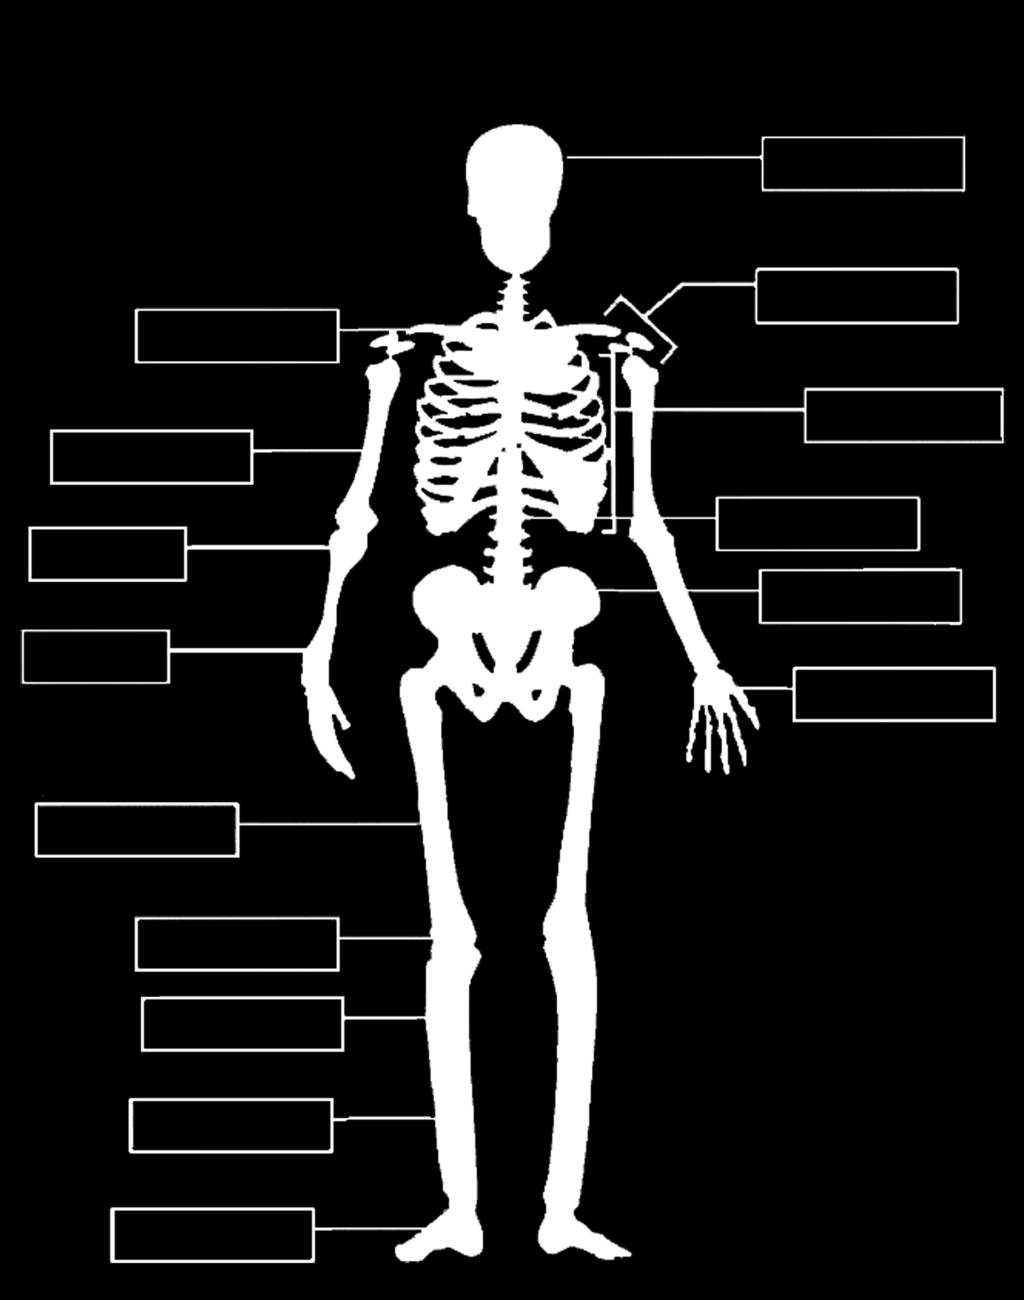 Human Skeleton Use the words in the box below to identify parts of the skeleton. Each bone in our bodies has a name. There are more than 200 bones in our bodies.